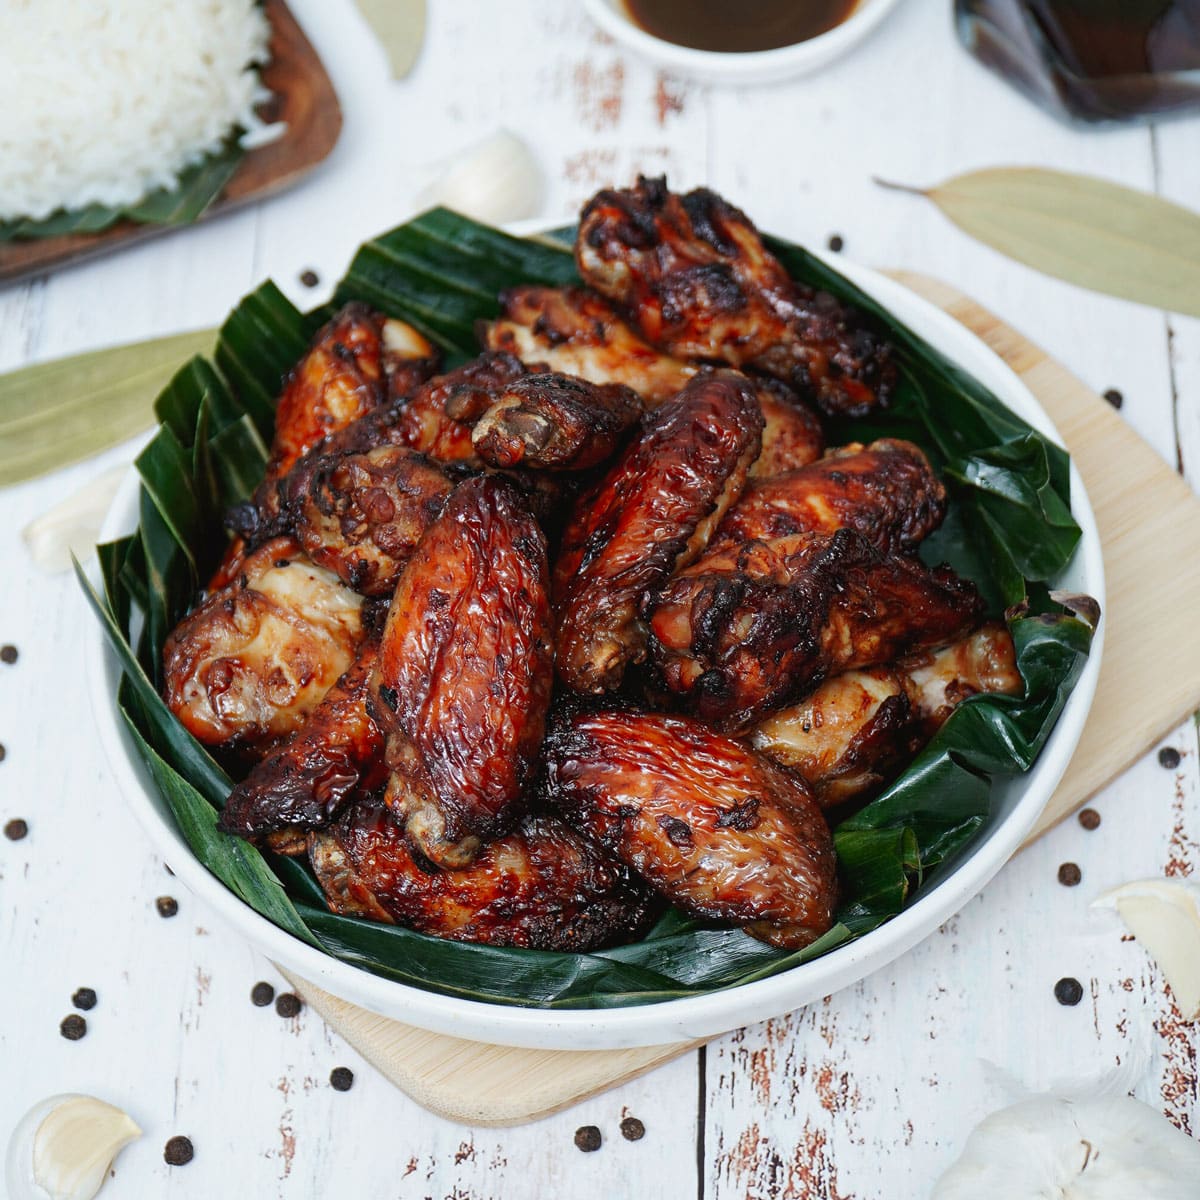 Air fryer adobo chicken wing served on a plate with banana leaf.